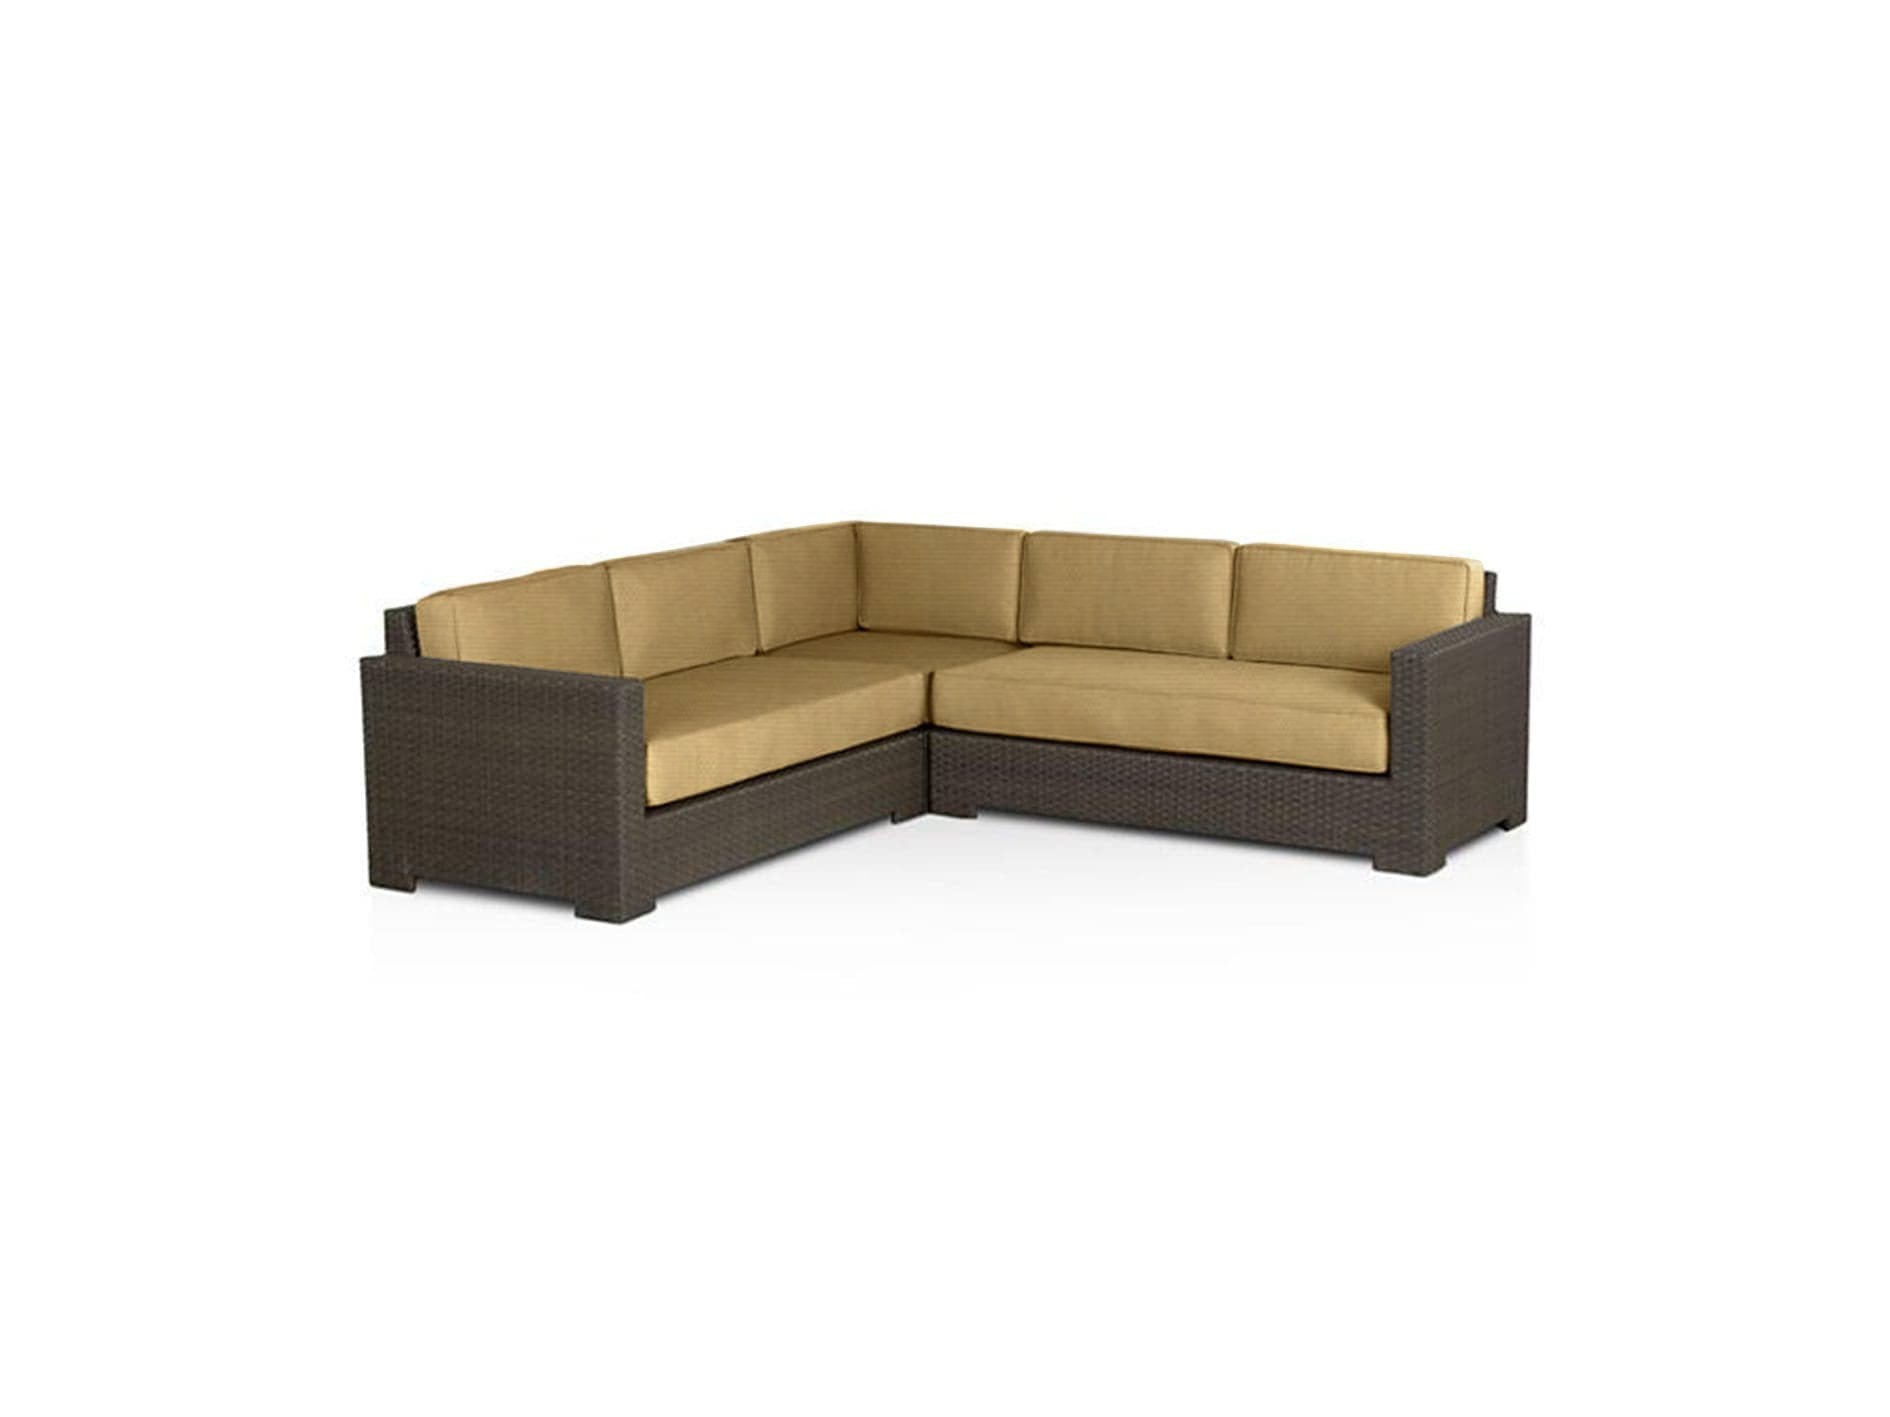 Custom Cushions Sectional Outdoor Settings Replacement Cushions Complete Set 1 2000x ?v=1535150085